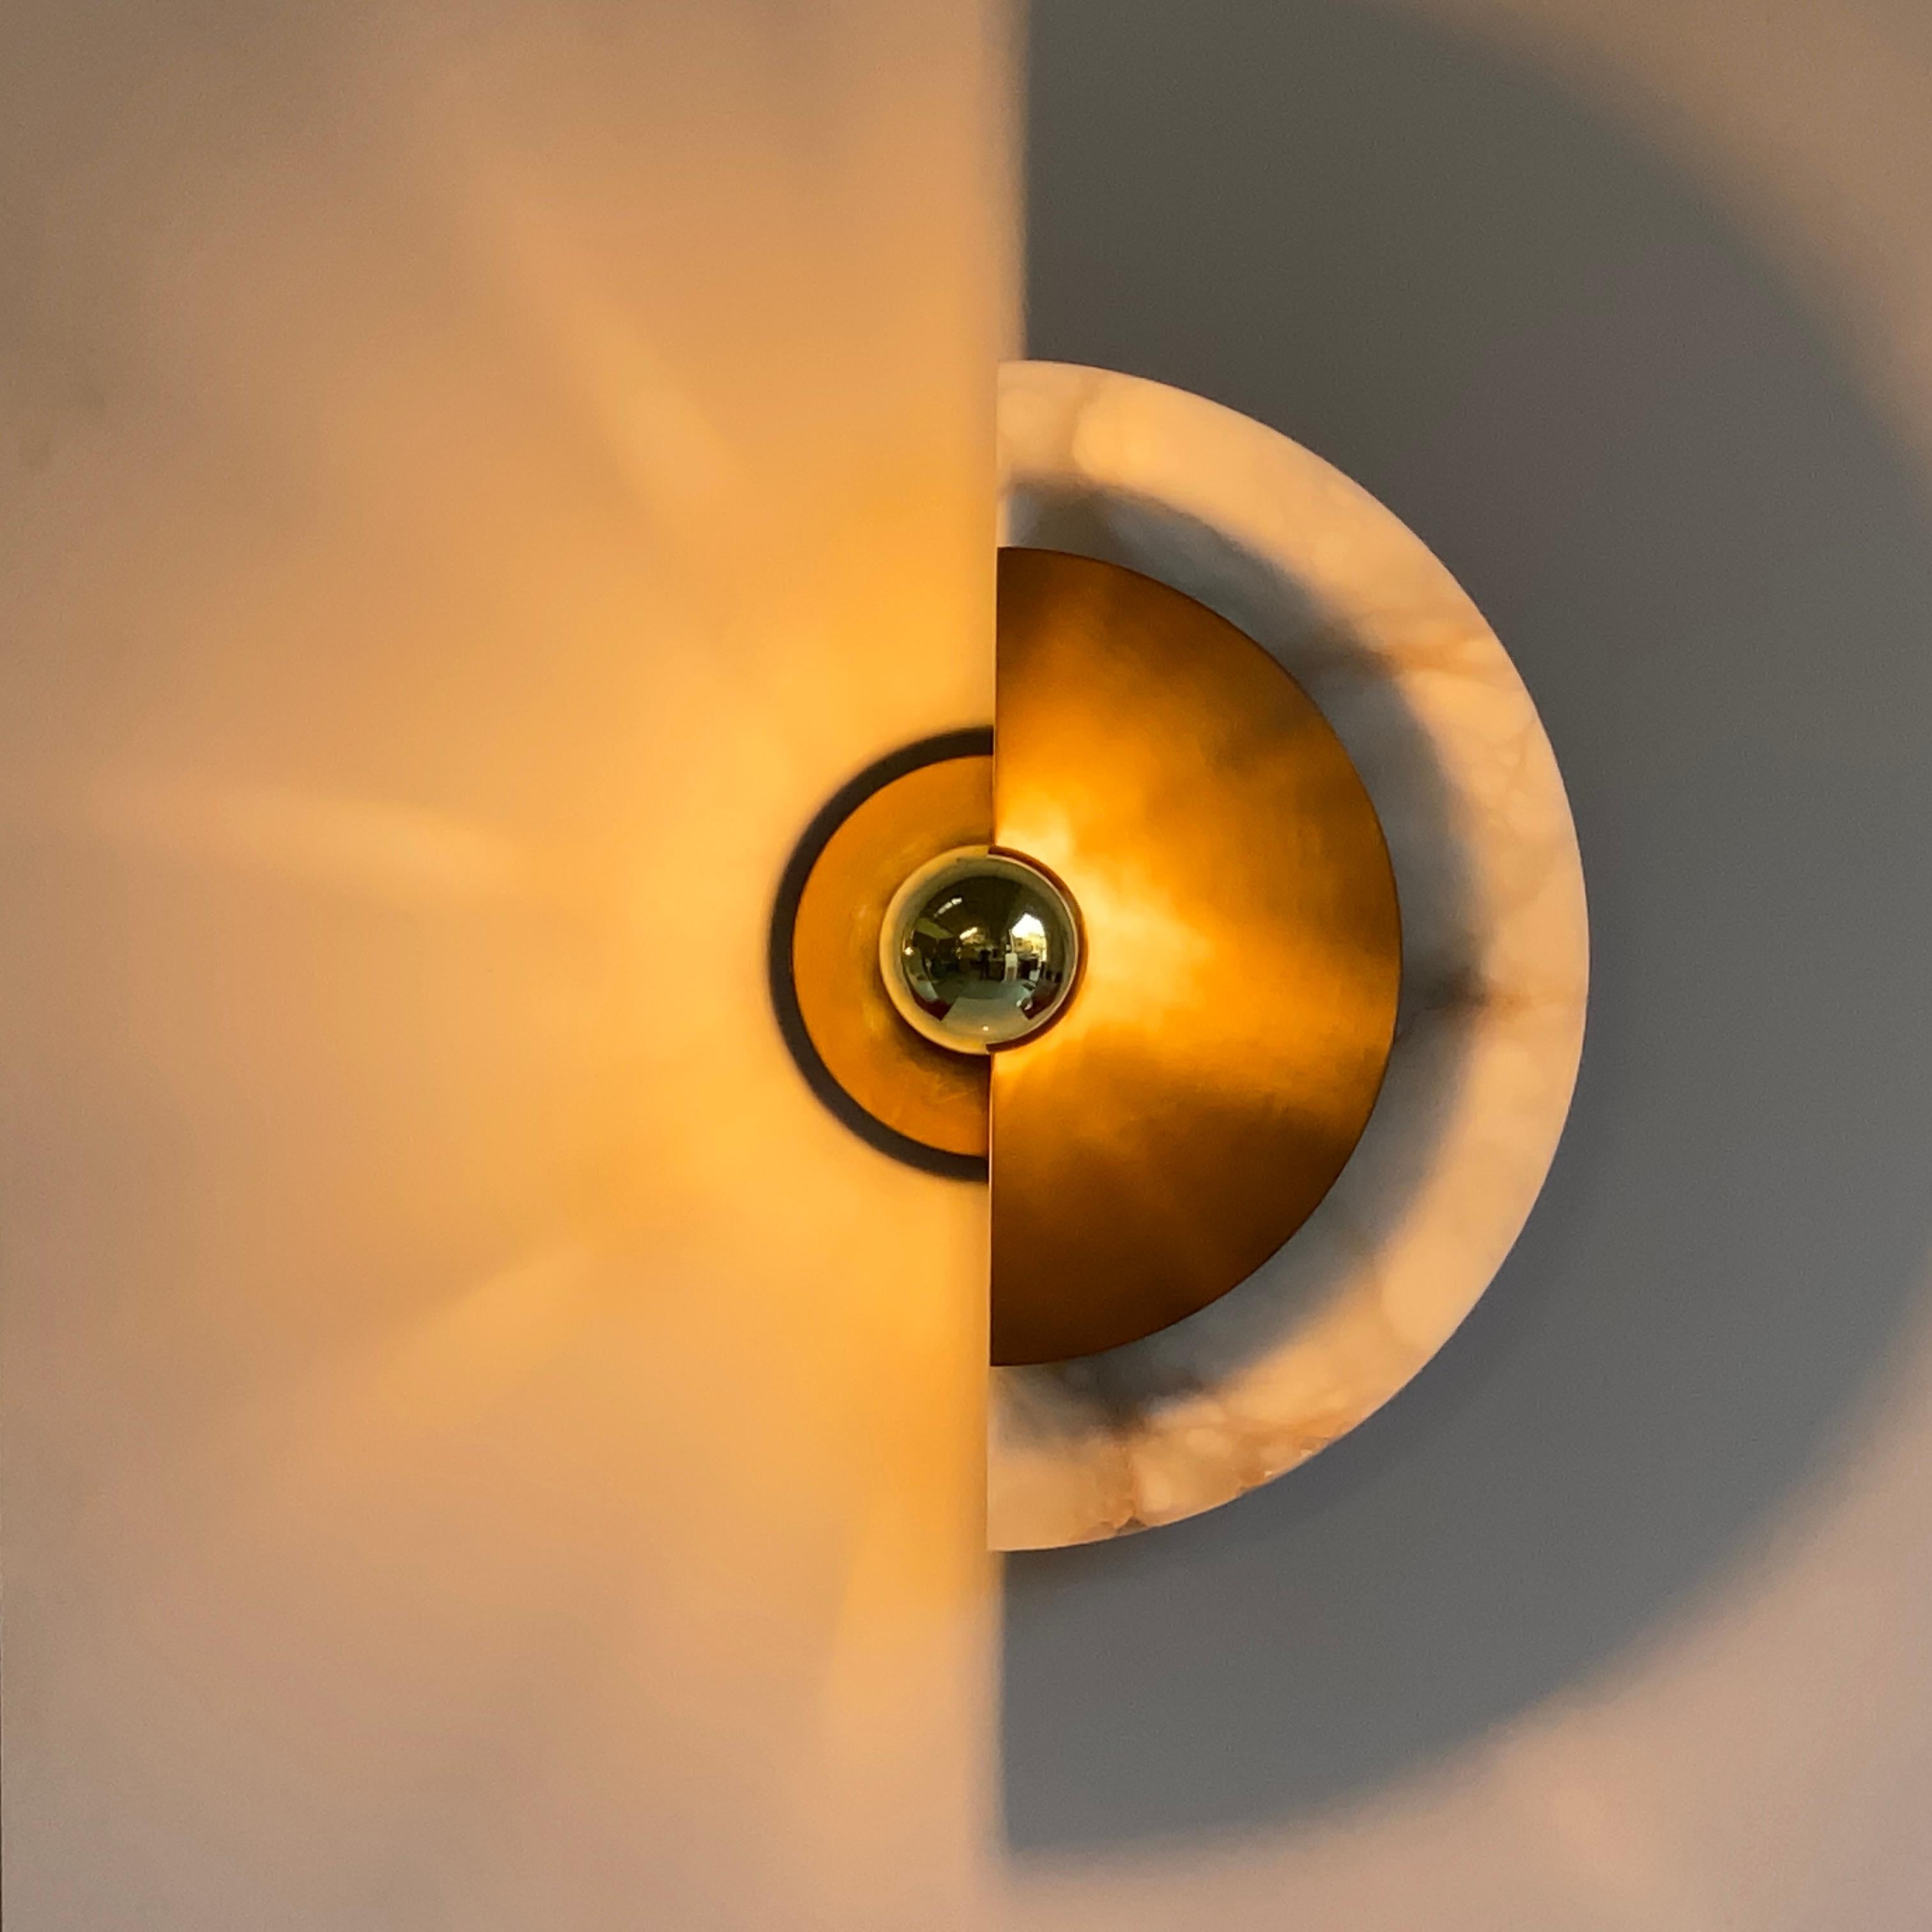 Cosulich interiors in collaboration with Matlight: this organic wall light, entirely handcrafted in Italy, with its circular shape is called LEVANTE for its strong natural reference to the sun and the moon. The possibility of placing the discs in 12